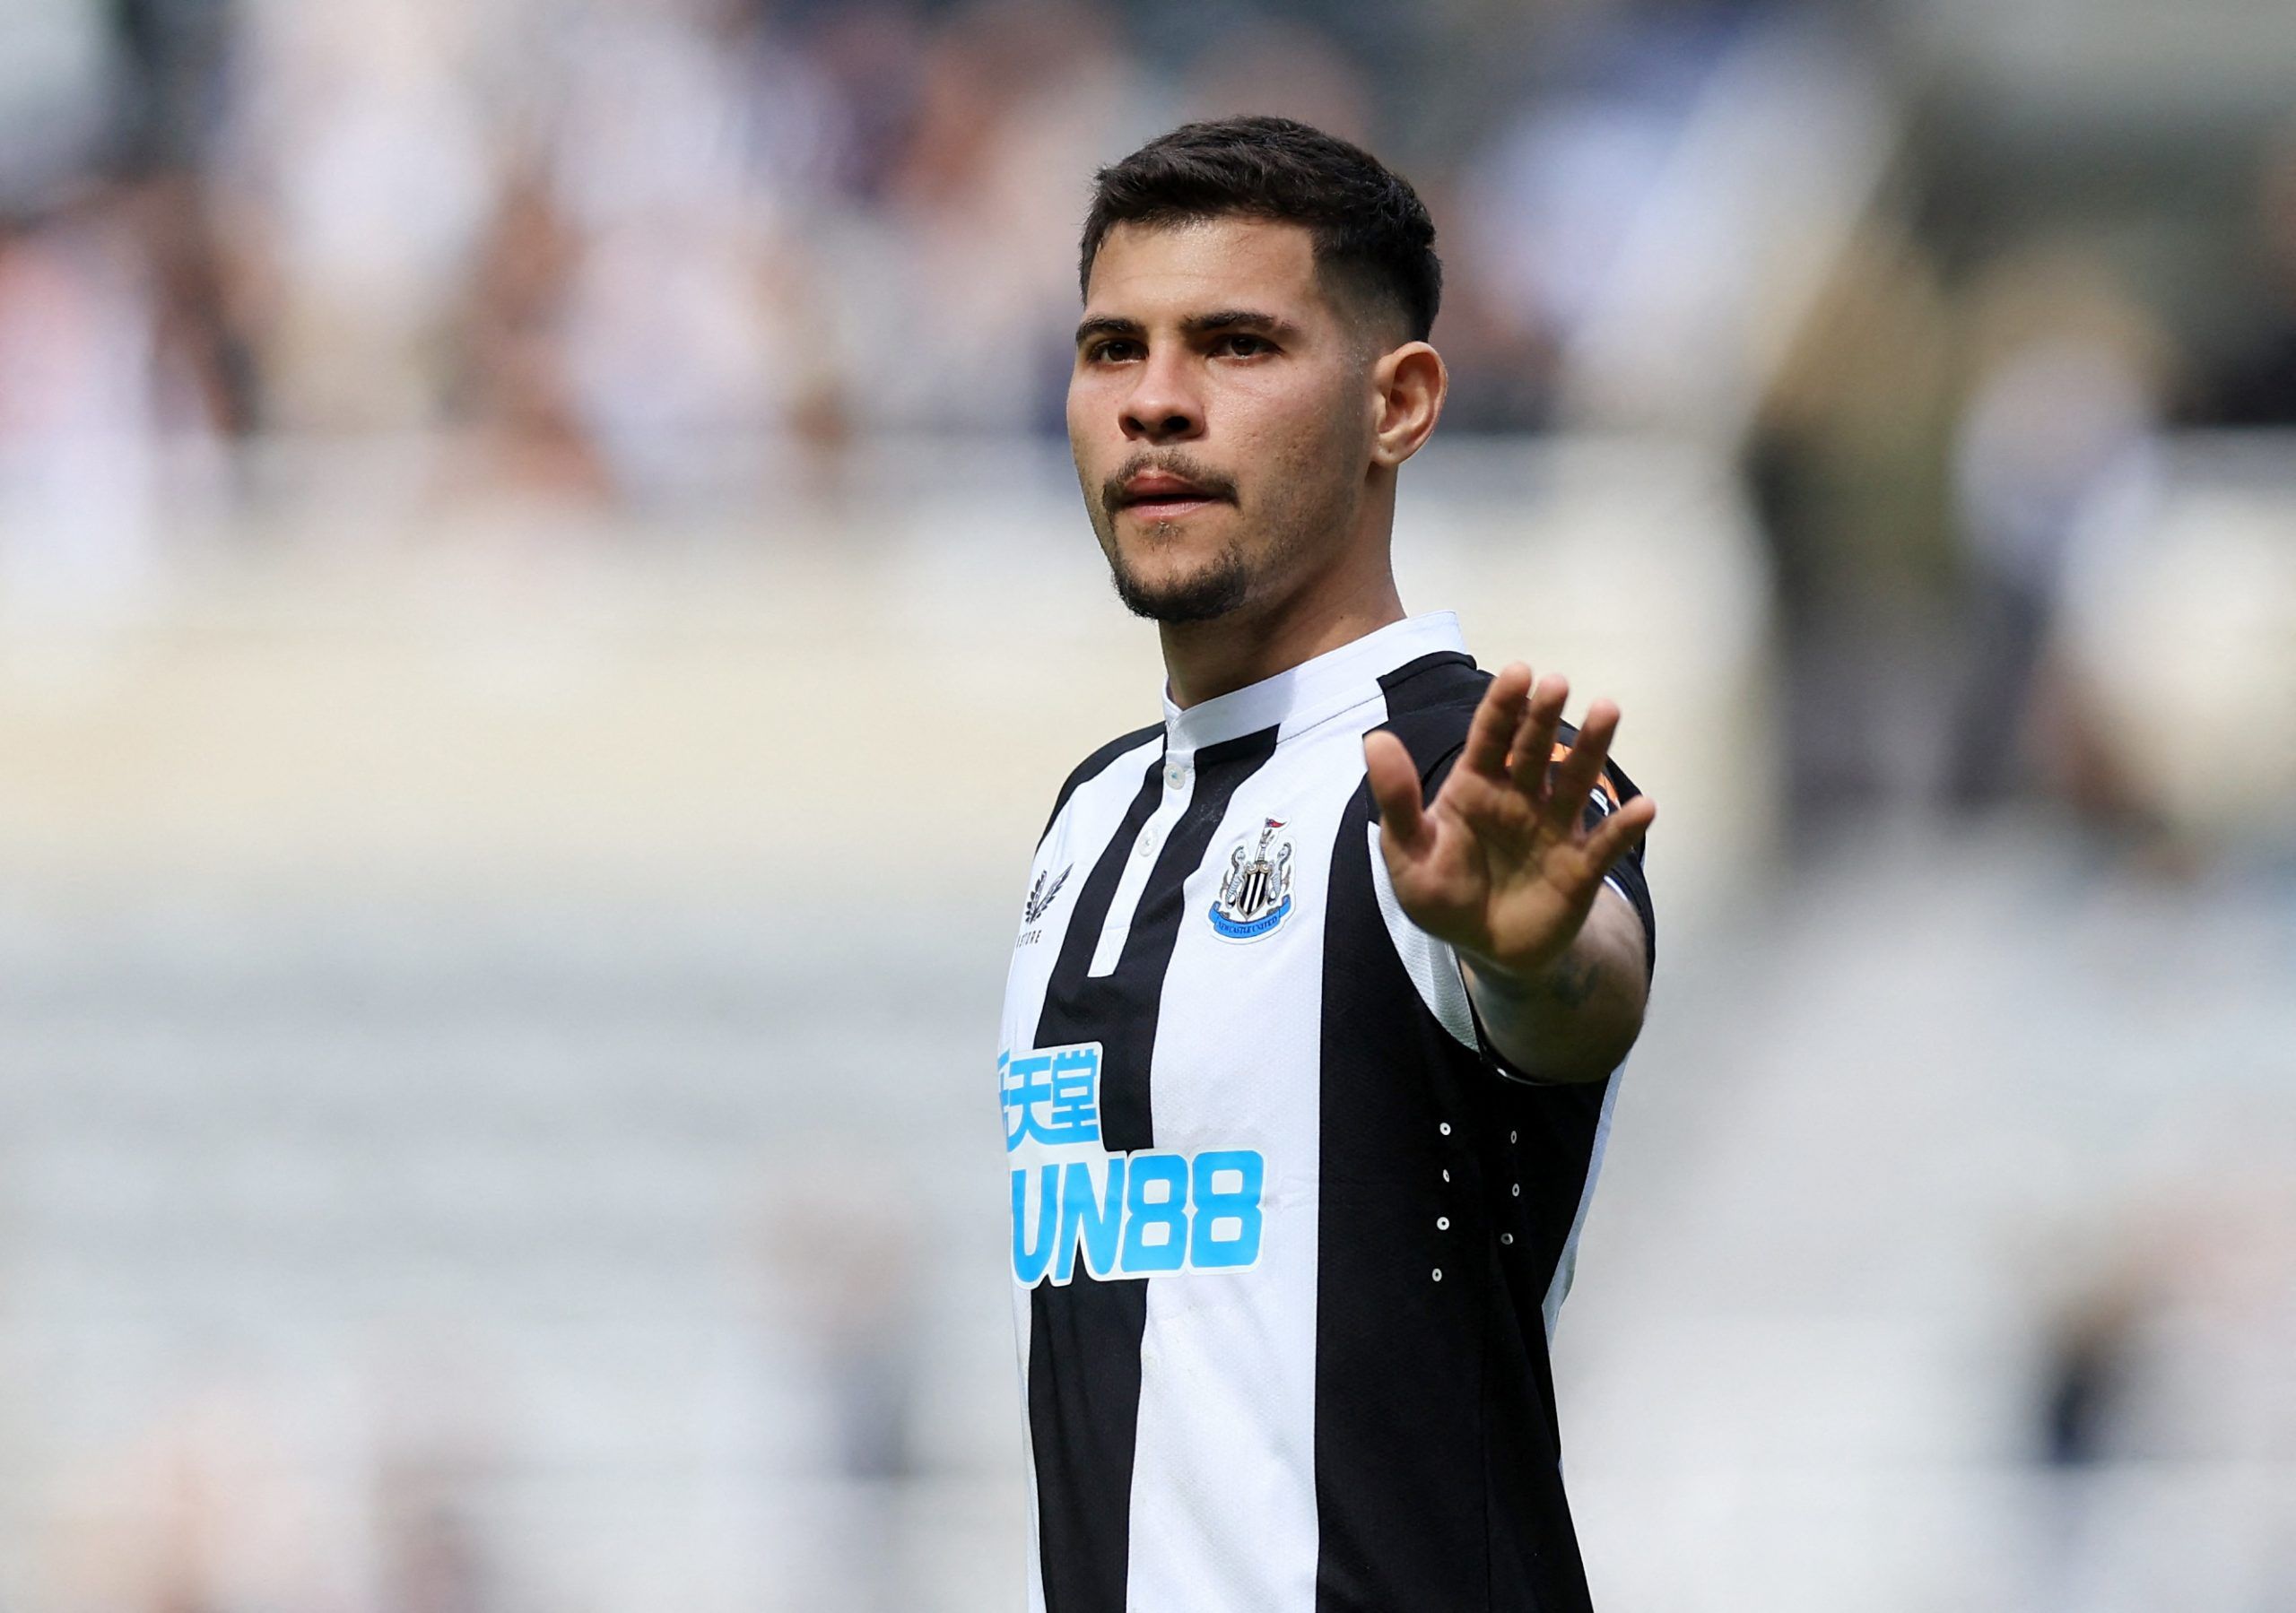 bruno-guimaraes-newcastle-united-tim-spiers-athletic-wolverhampton-wanderers-transfer-claim-premier-league-latest-neves-lage-moutinho-dendoncker-updateSoccer Football - Premier League - Newcastle United v Liverpool - St James' Park, Newcastle, Britain - April 30, 2022 Newcastle United's Bruno Guimaraes after the match Action Images via Reuters/Lee Smith EDITORIAL USE ONLY. No use with unauthorized audio, video, data, fixture lists, club/league logos or 'live' services. Online in-match use limite